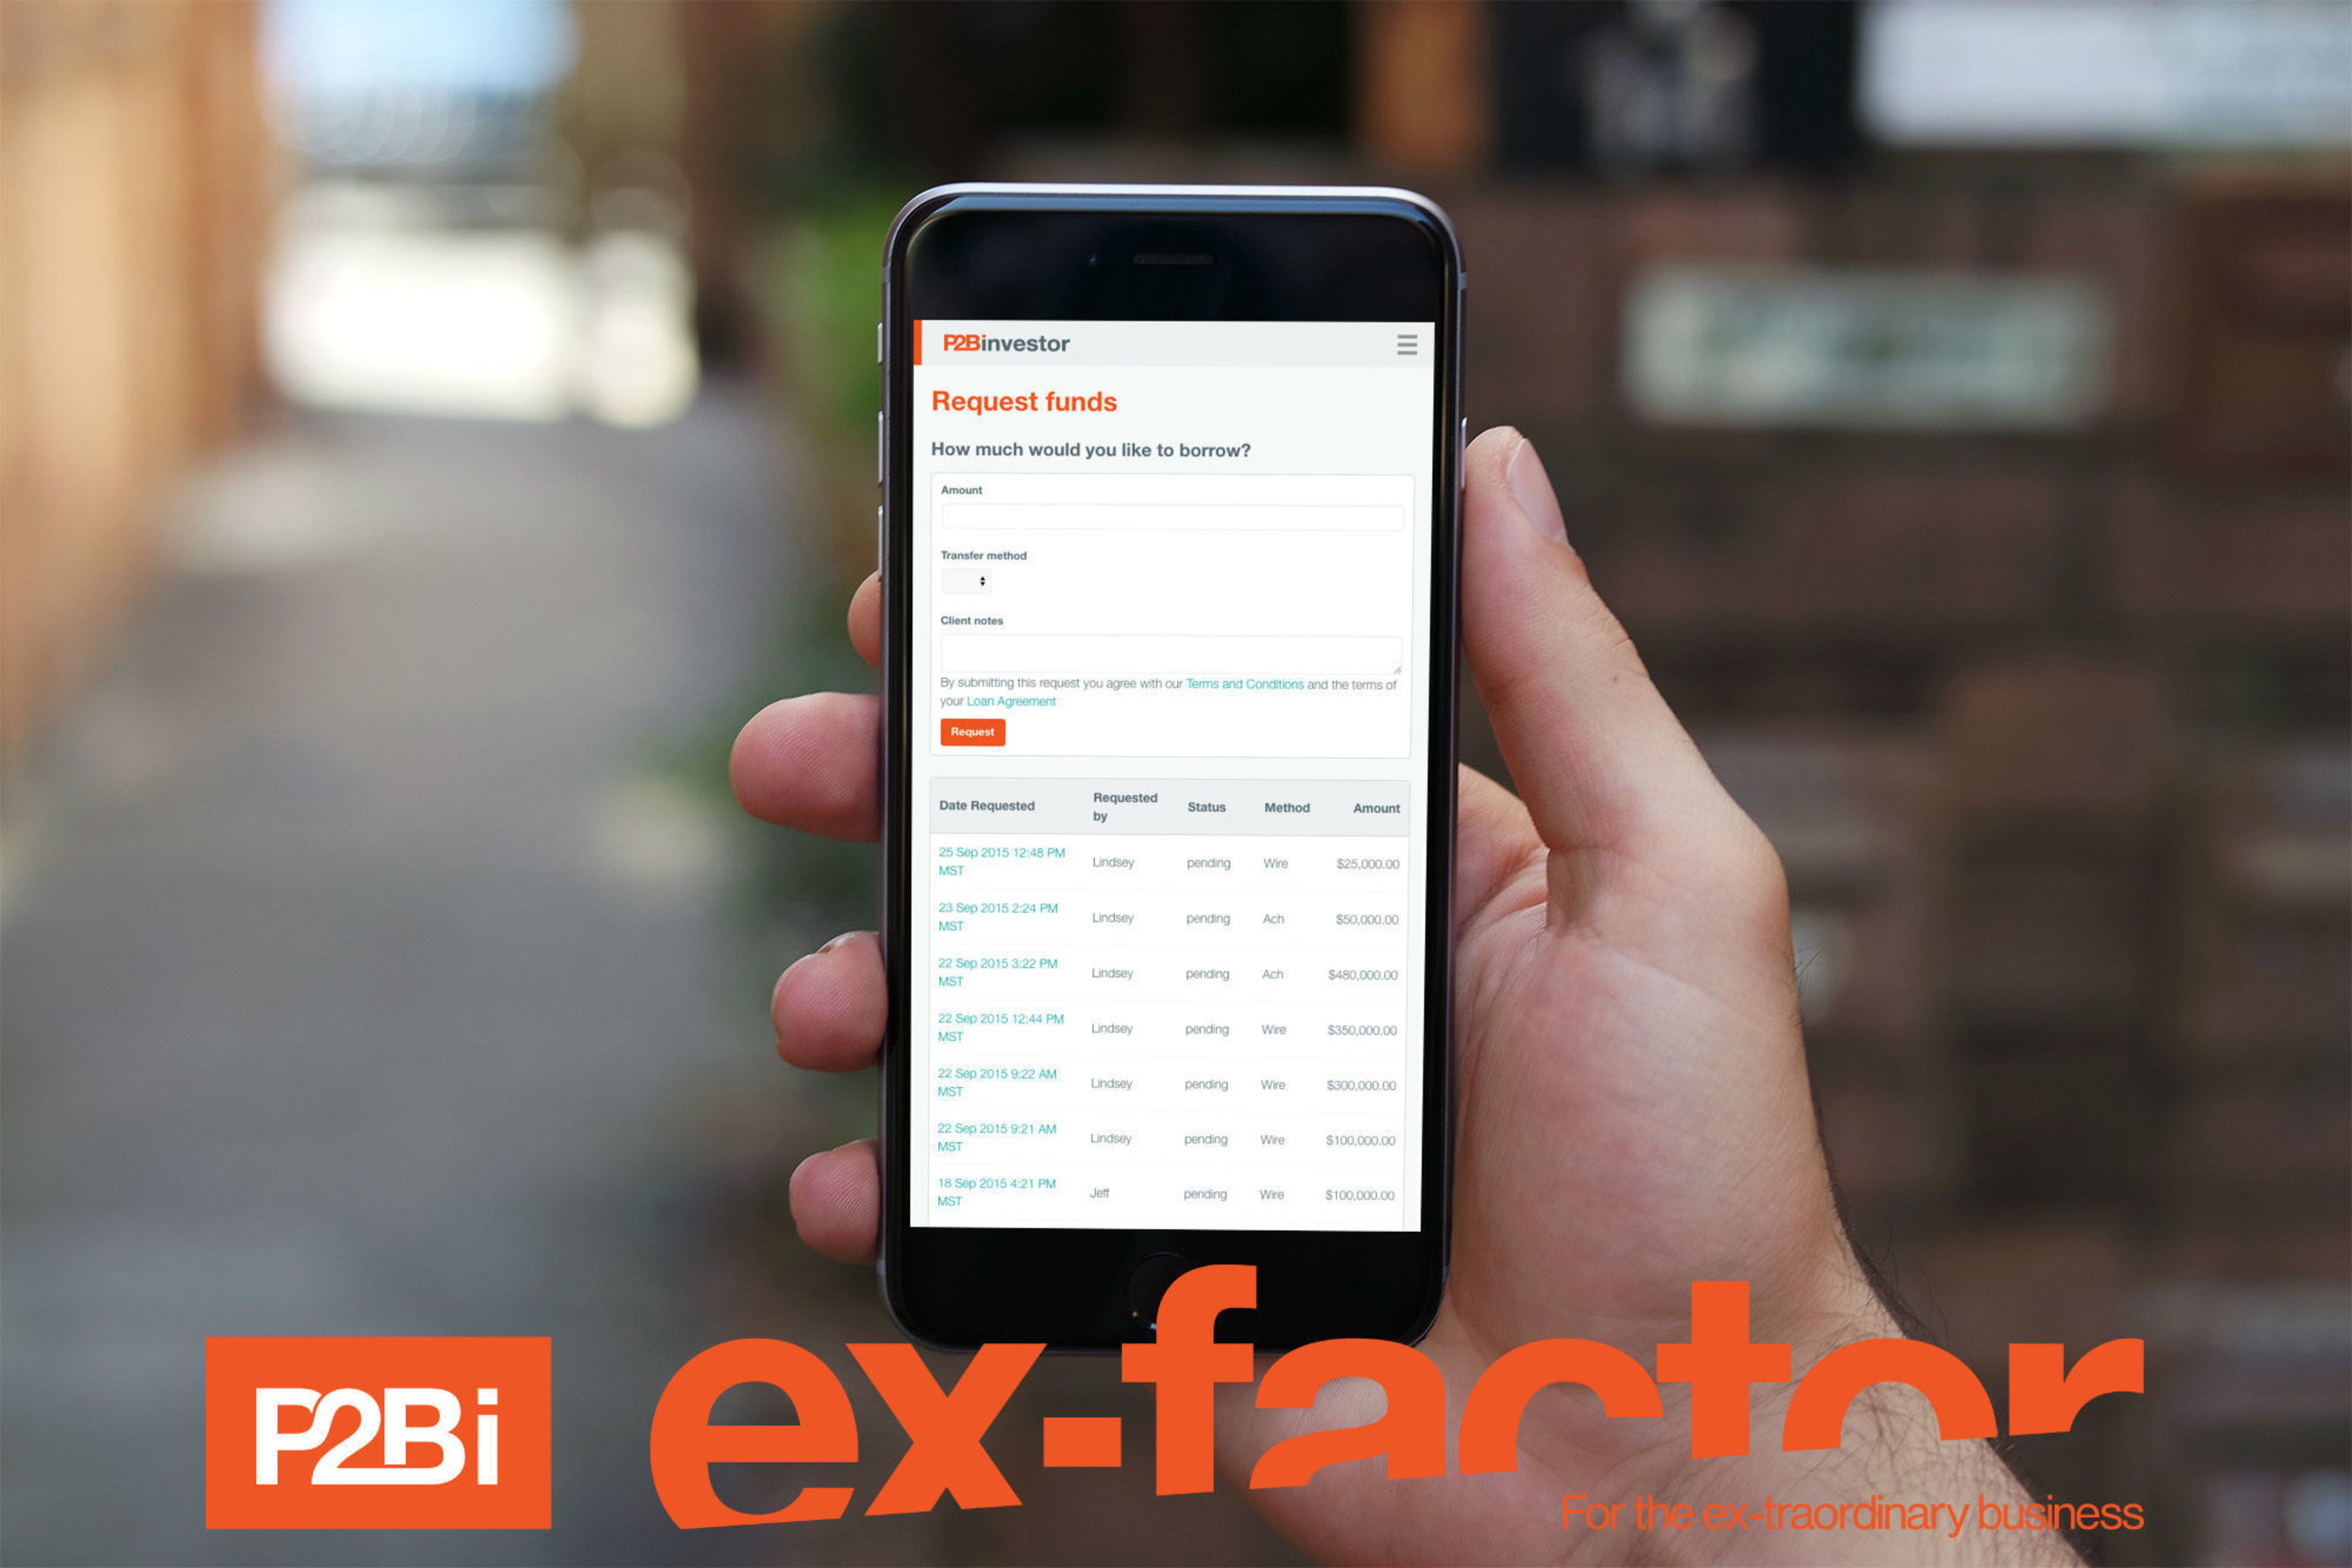 "Marketplace lender P2Binvestor launches "Ex-Factor," an asset-based line of credit. Among many benefits, the new working capital product allows borrowers to access and manage funds from its Lending Hub online or from mobile devices."